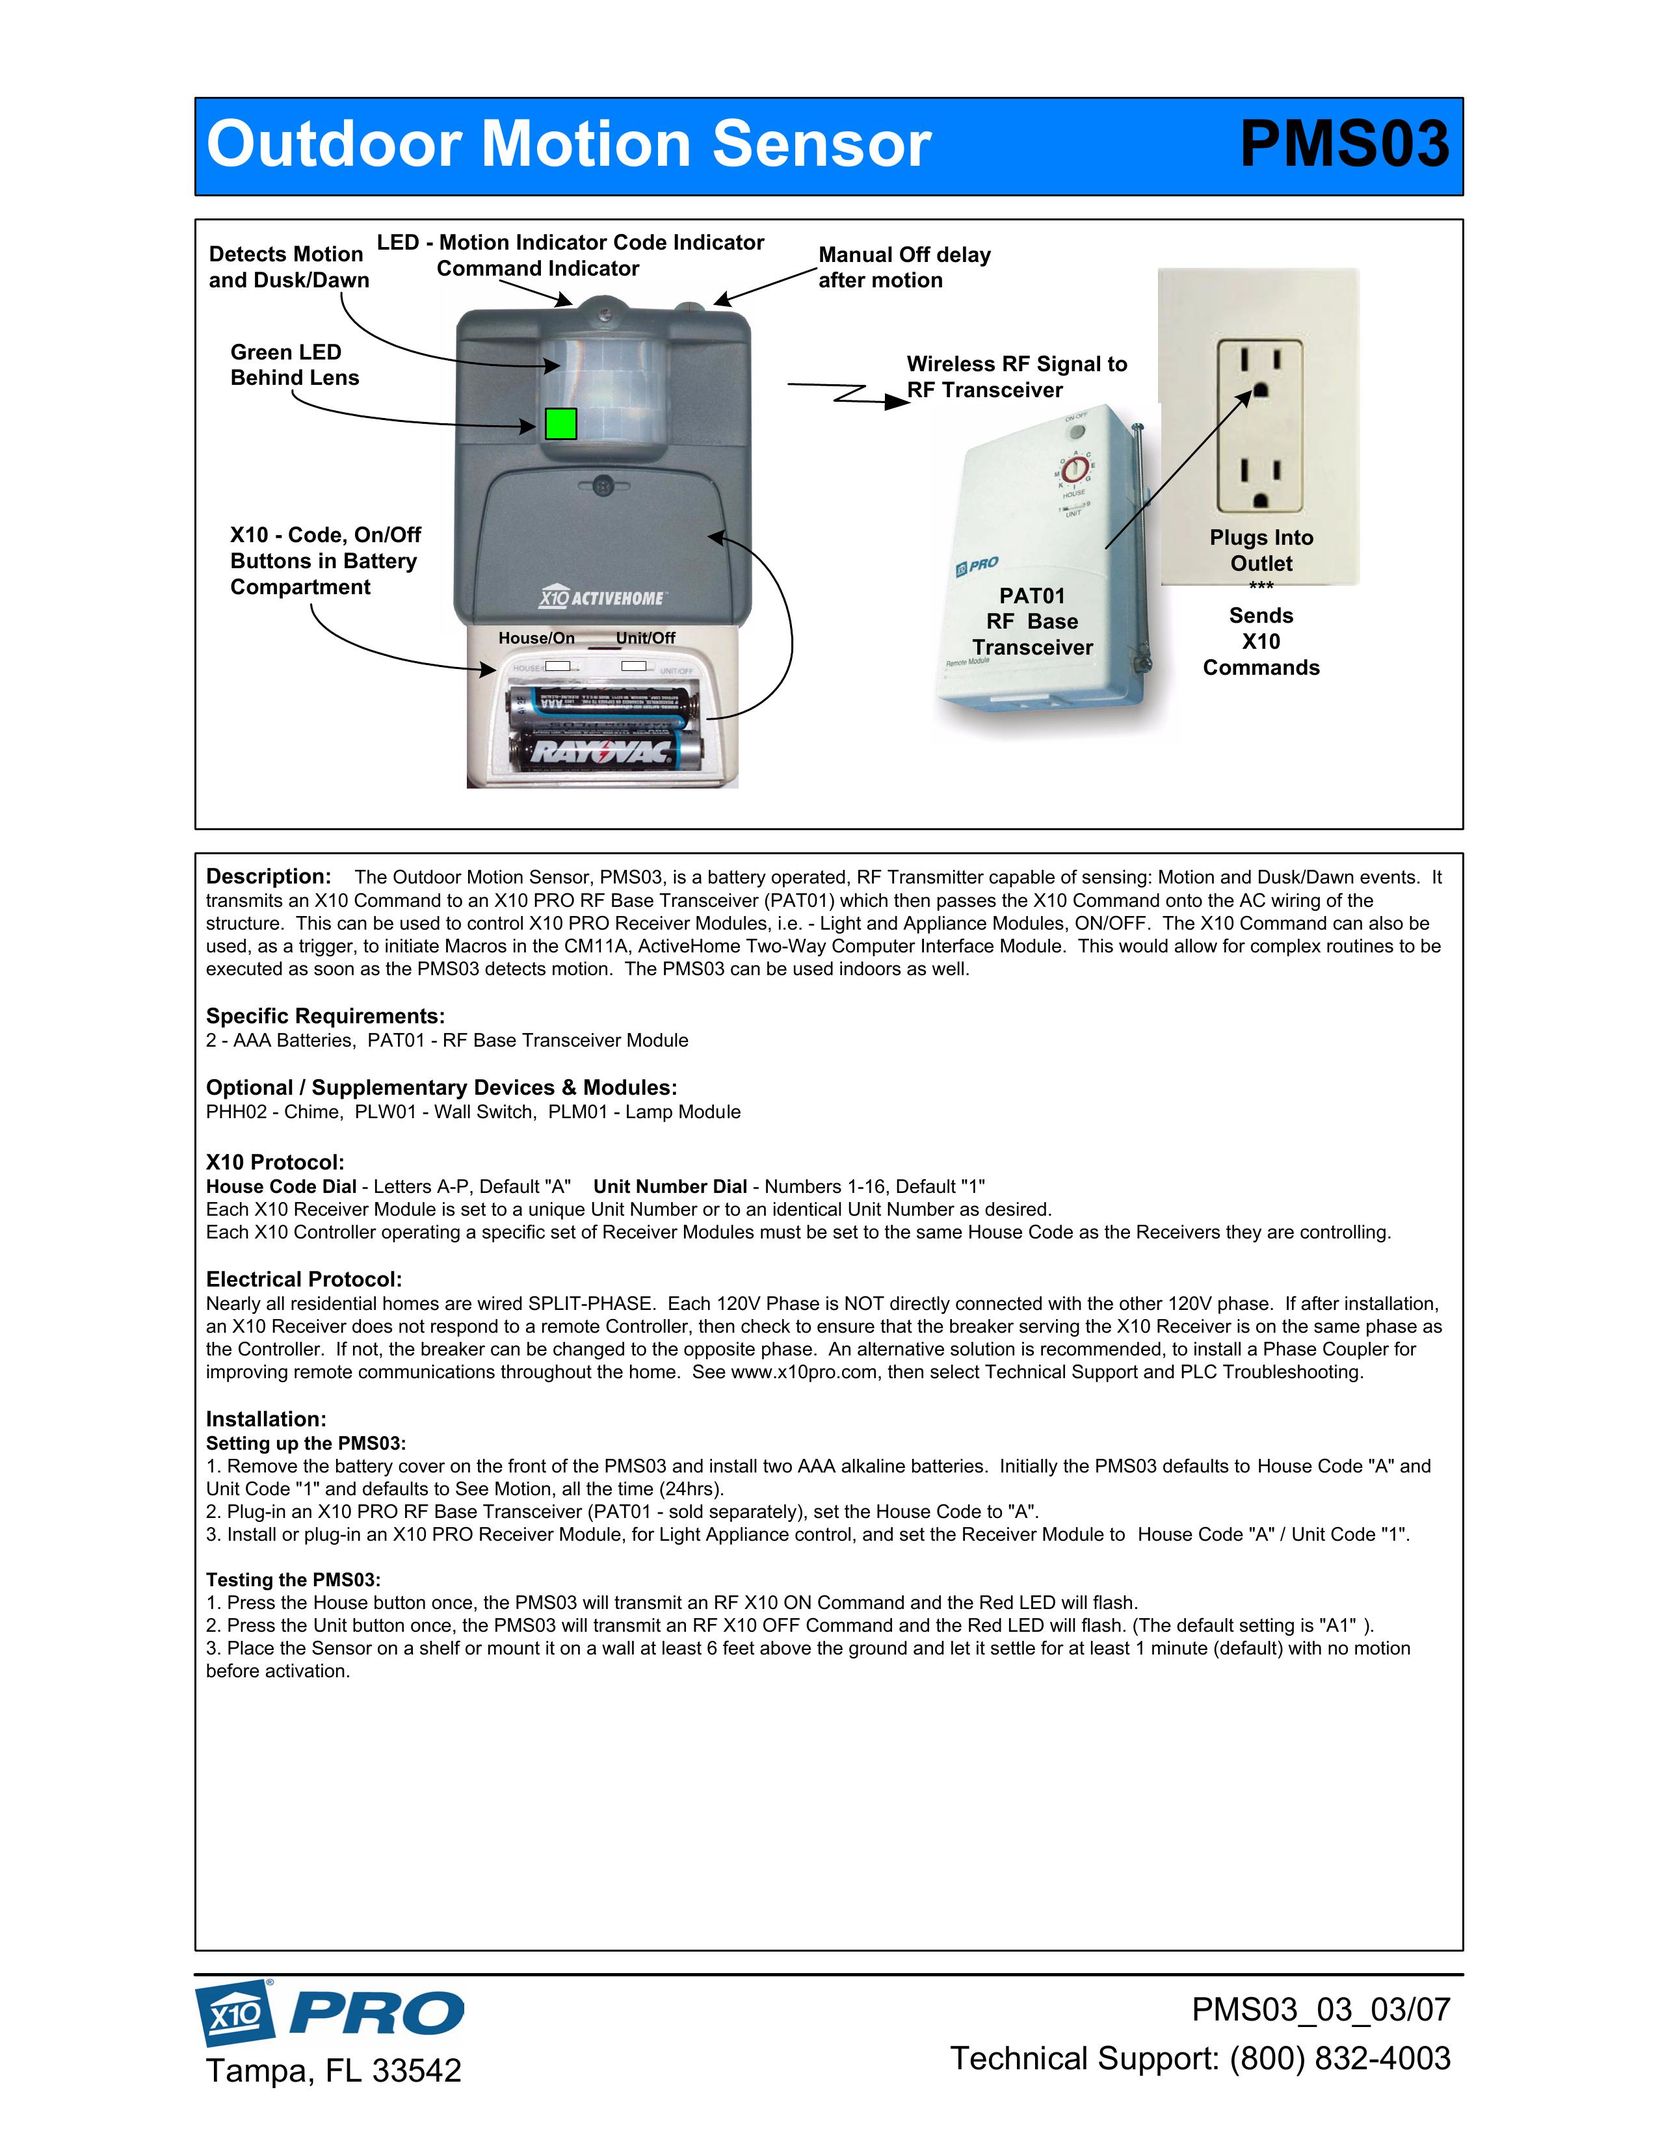 HomeTech PMS03 Home Safety Product User Manual